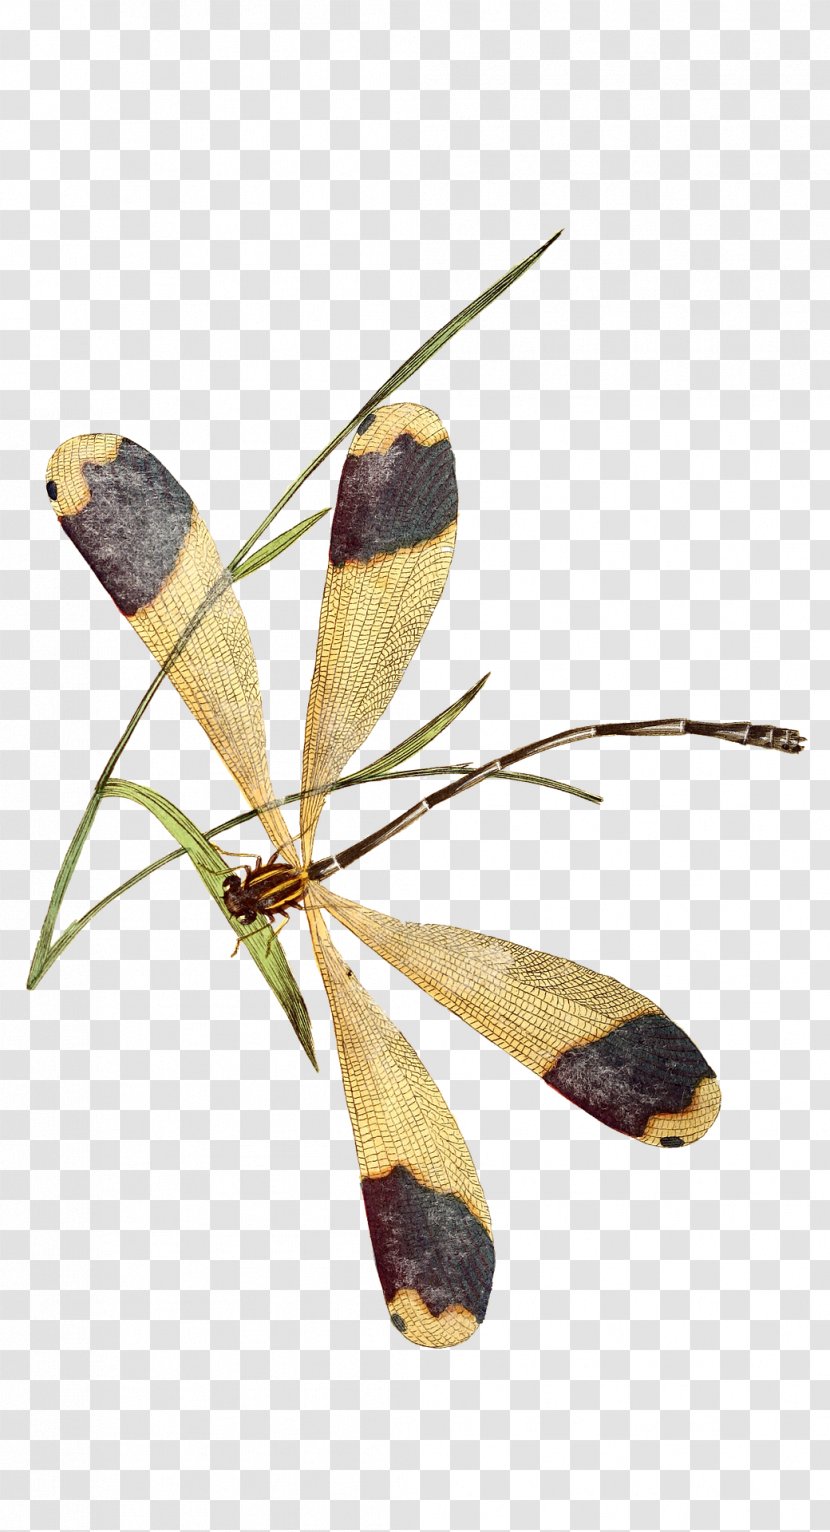 Insect Butterfly Dragonfly Naturalist Printmaking - On Grass Transparent PNG